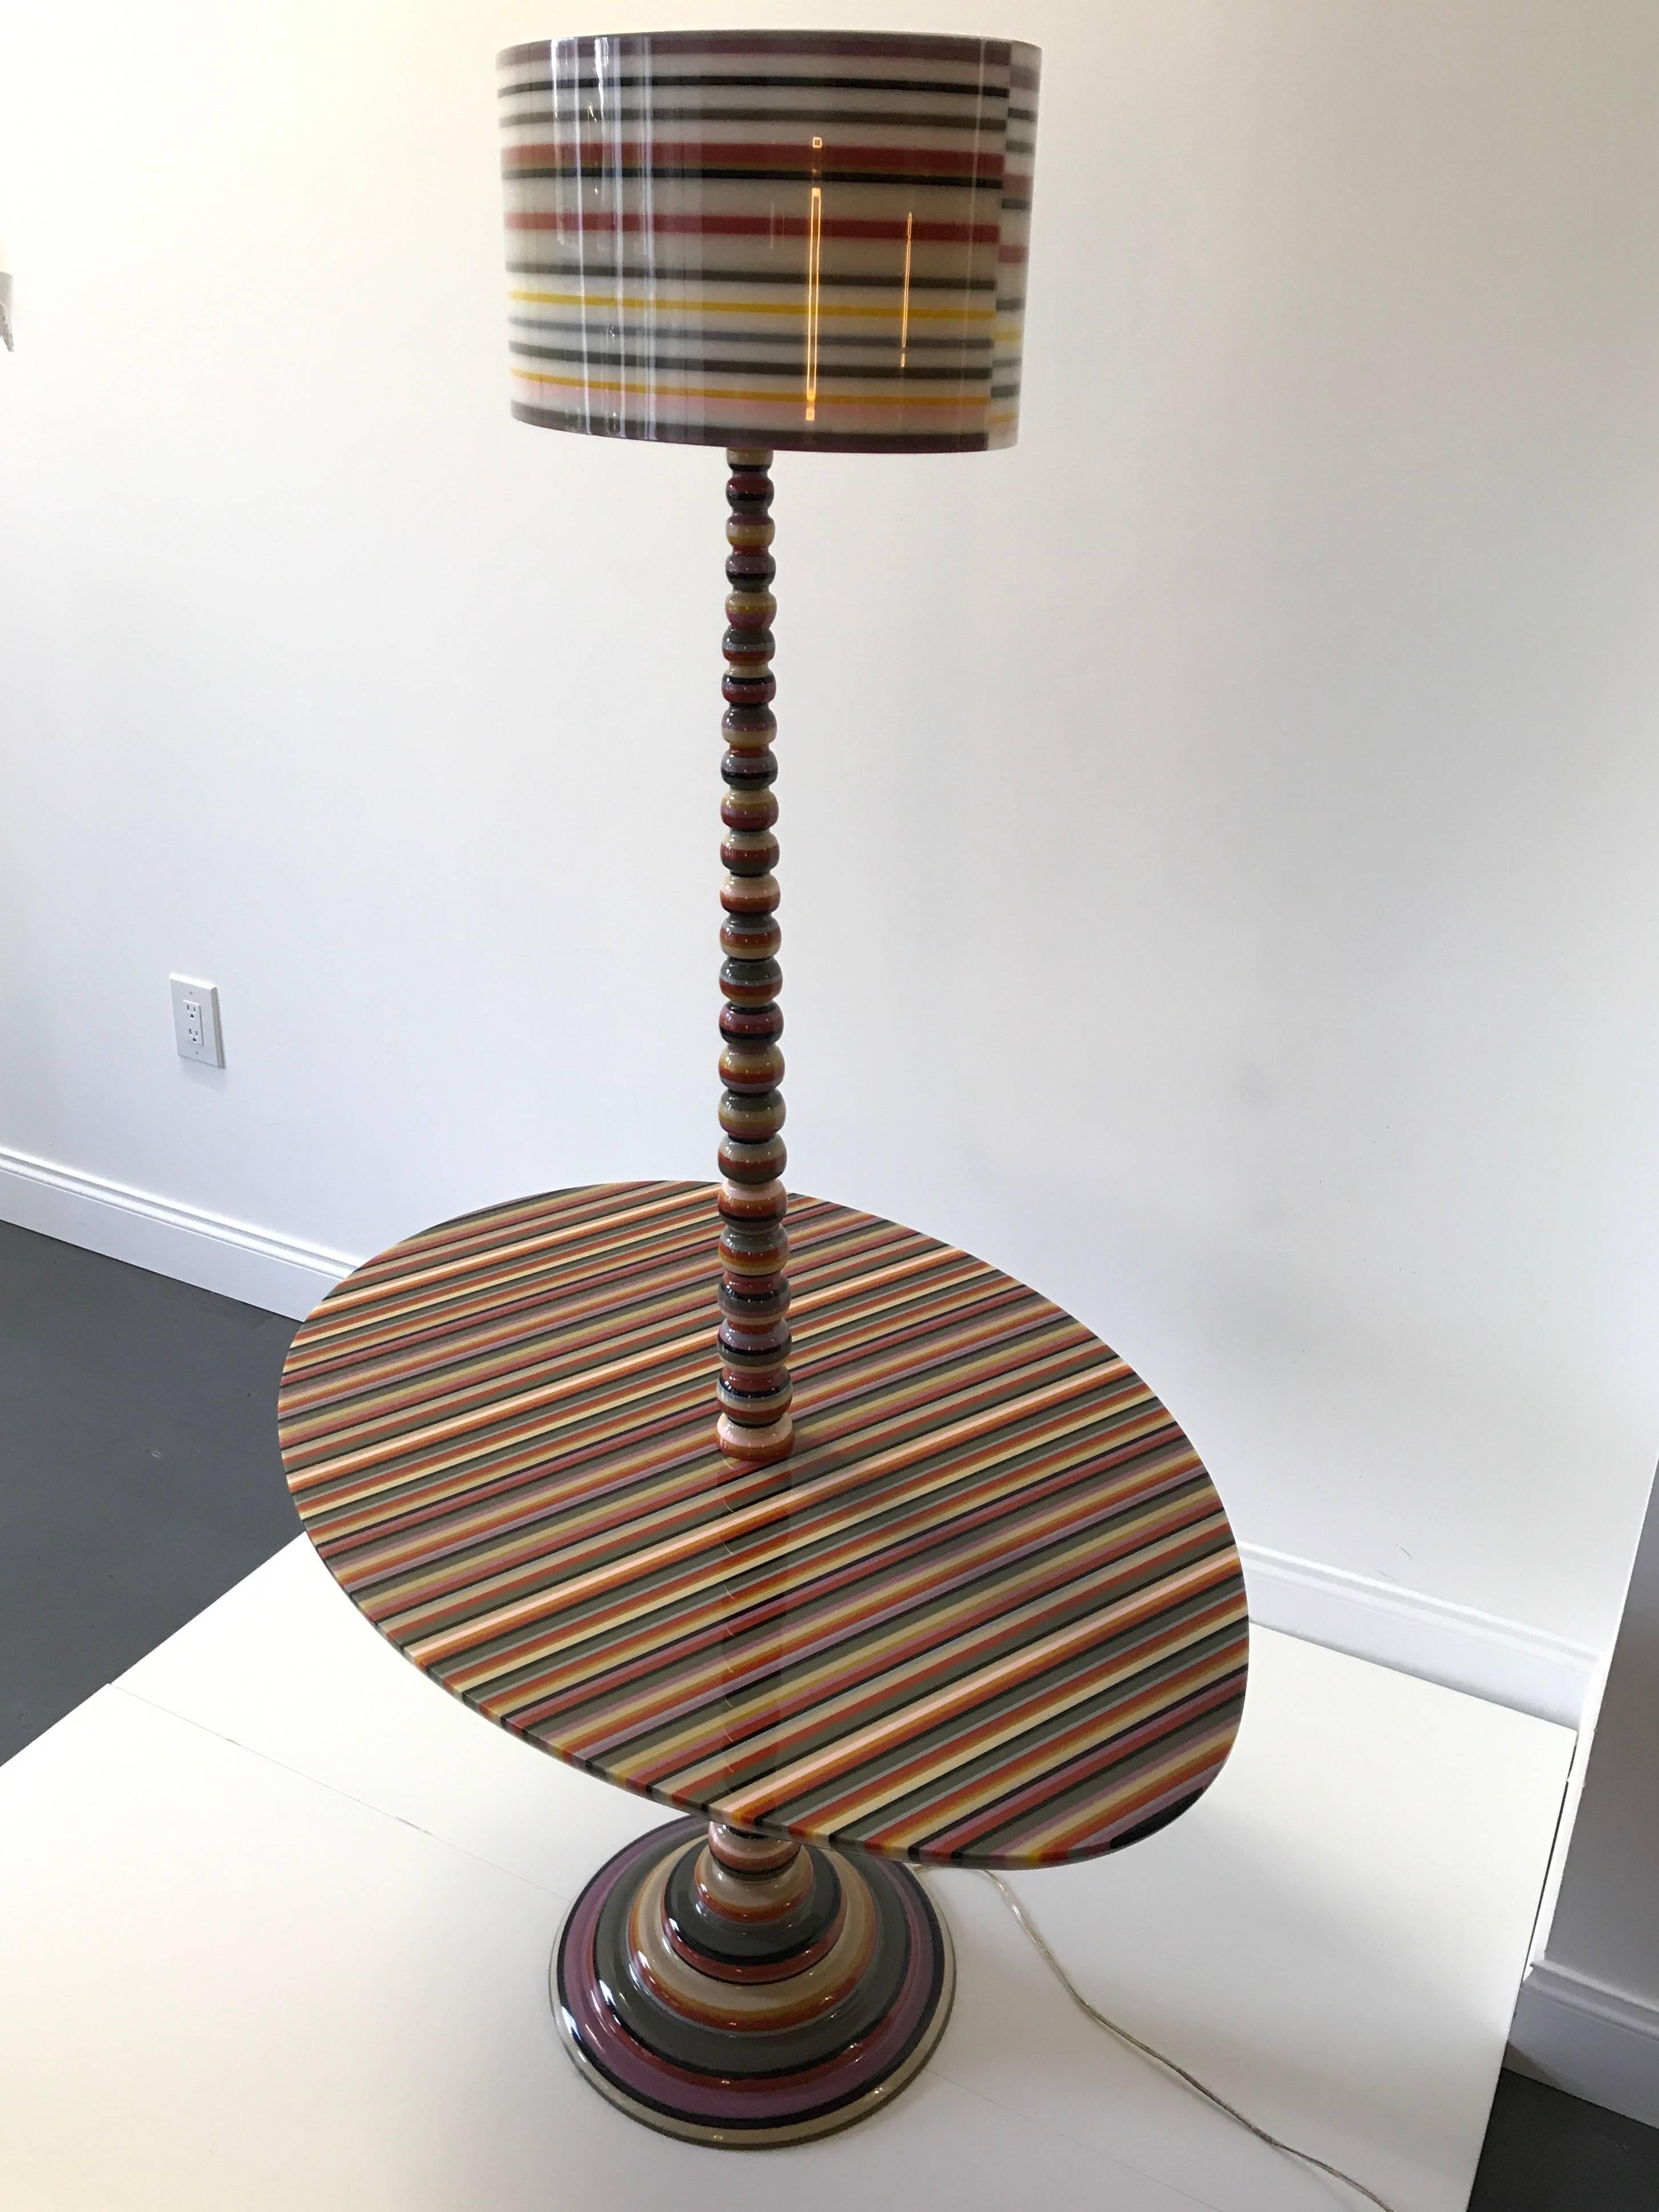 Revolutionary acrylic engineered and designed floor lamp with patented acrylic striping by Jose Martin, Brazil.

Limited edition of three; one available in the US for immediate purchase.

Considered a multimedia artist, art for Jose Marton